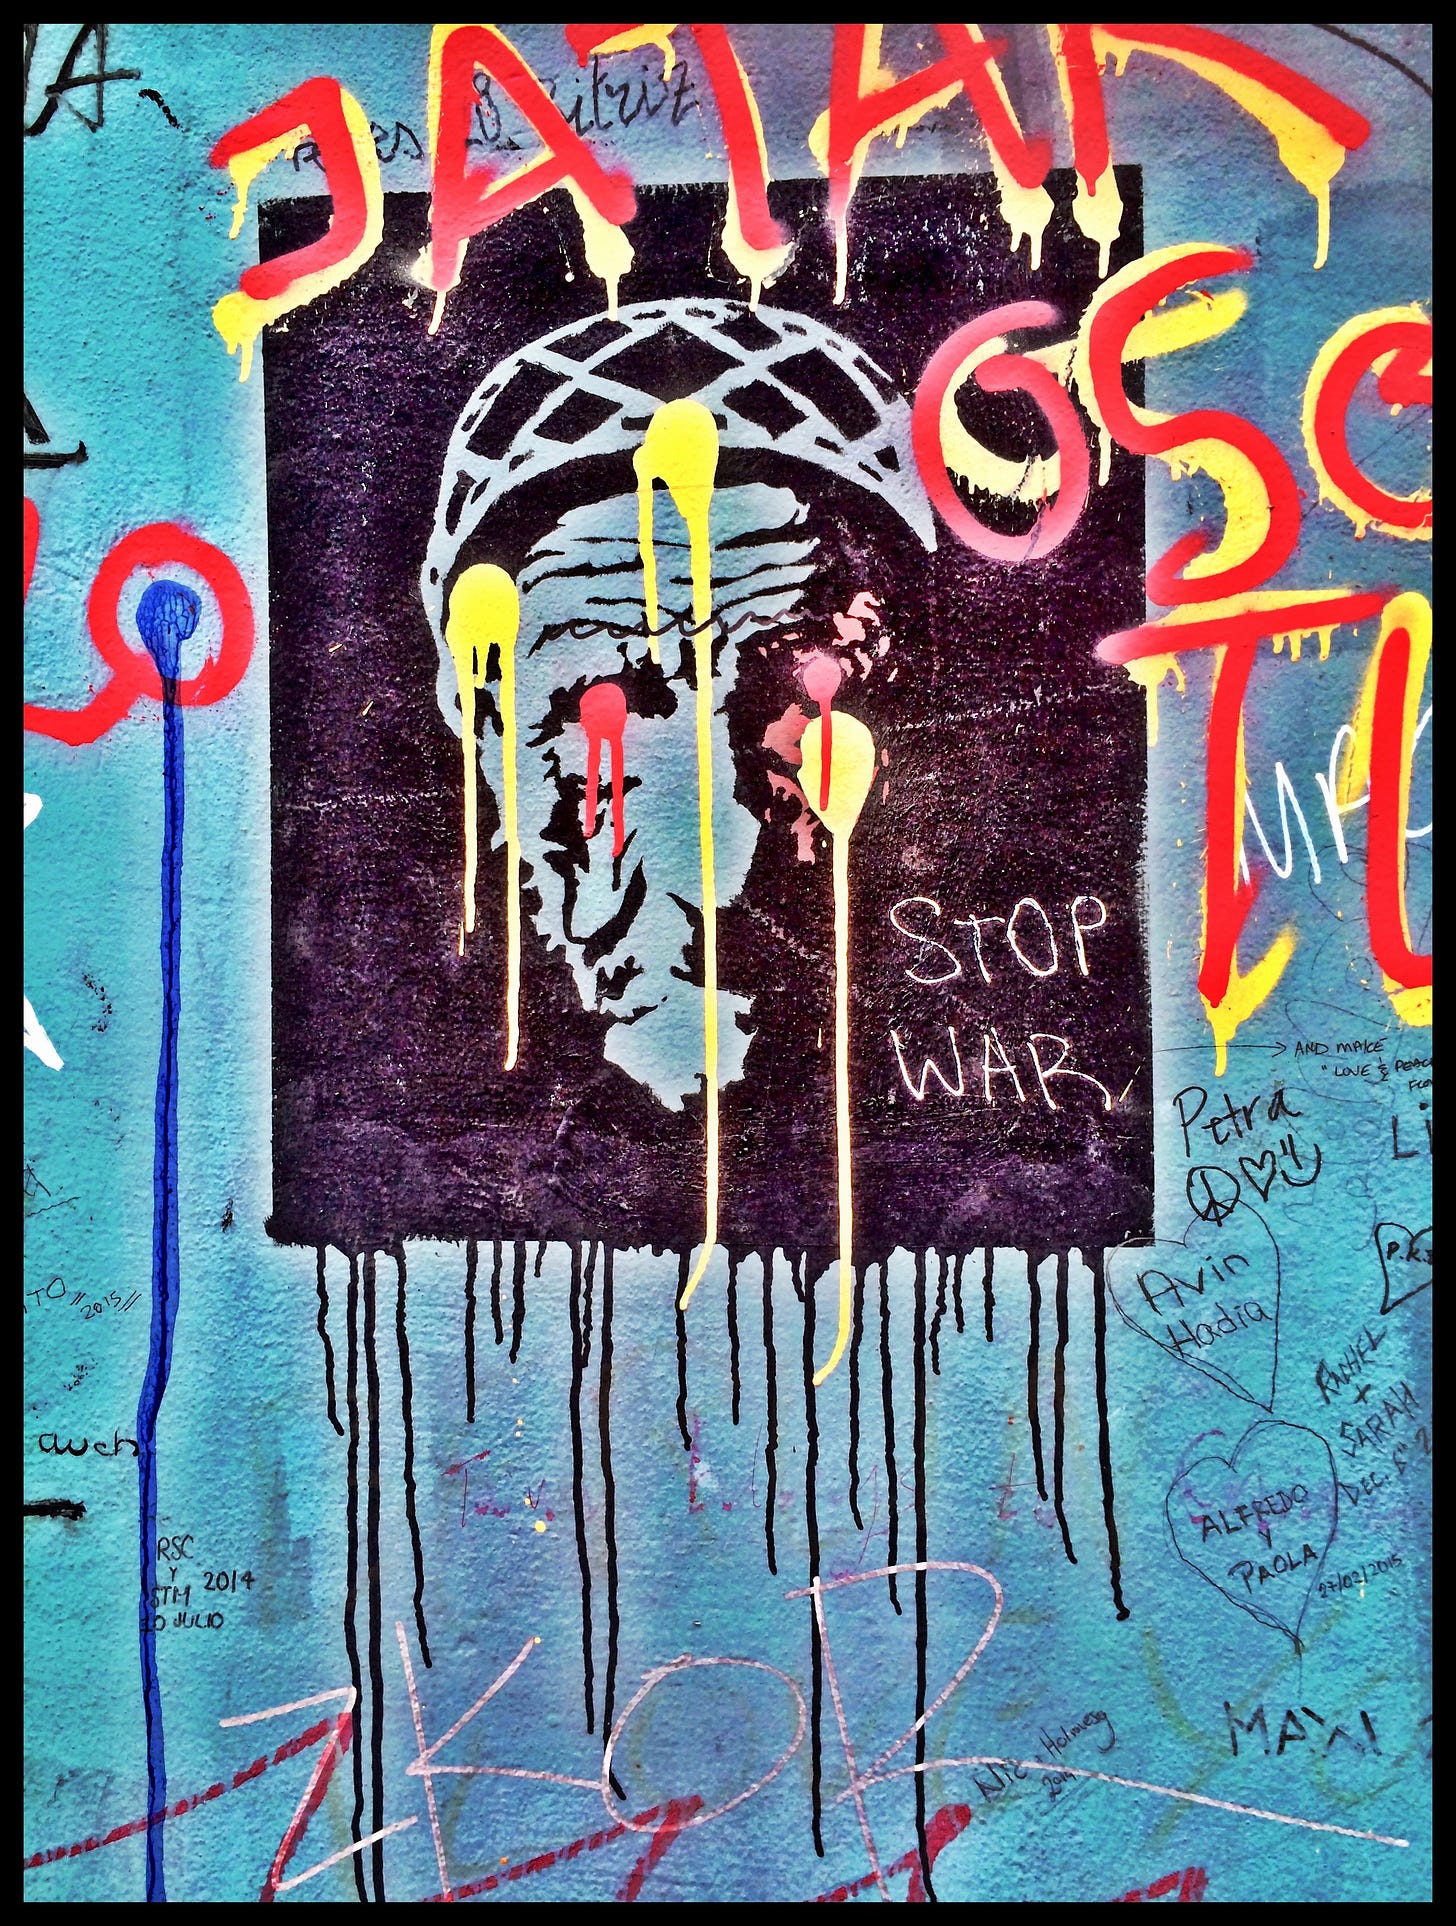 A spray painted image of a face on a wall, with lots of graffiti on top and around it, including the words "STOP WAR."